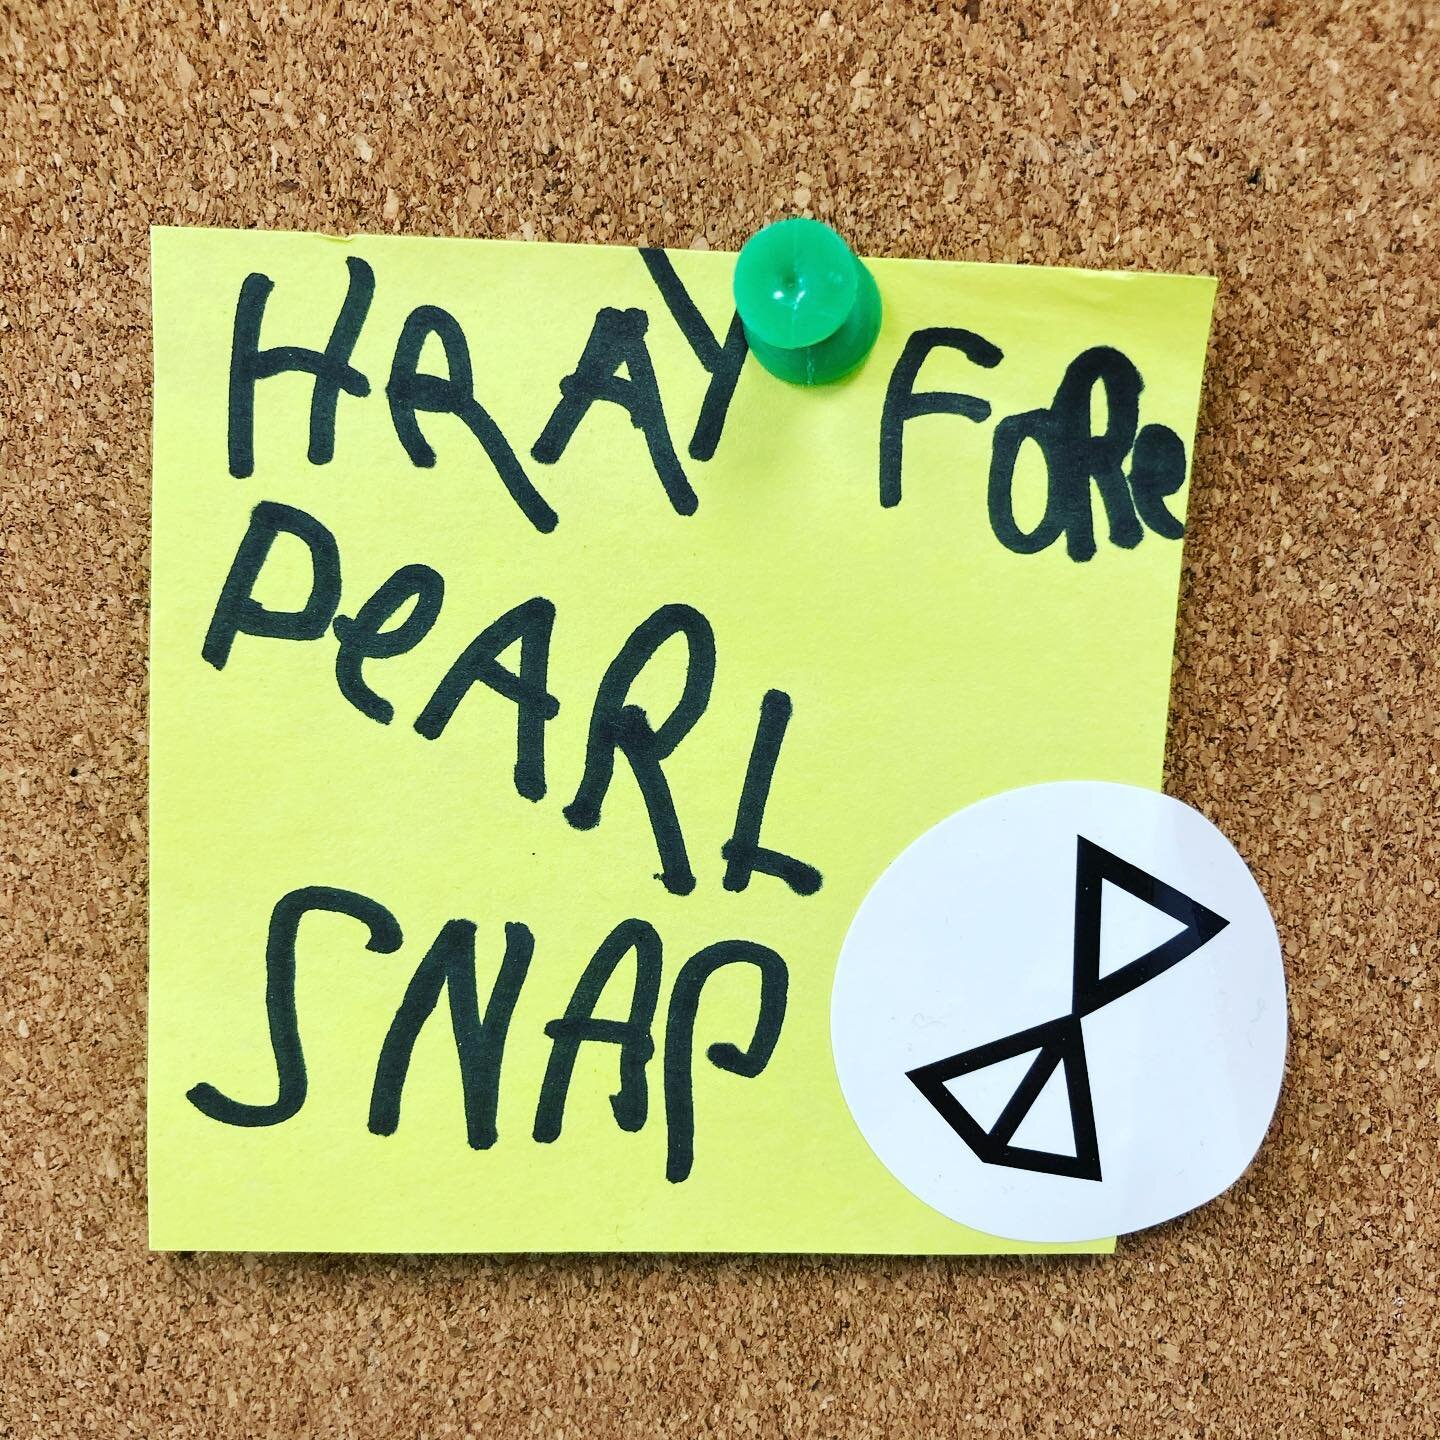 &ldquo;Hooray for Pearlsnap&rdquo; - when you&rsquo;re a business owner and your kids visit 🥰🥰🥰